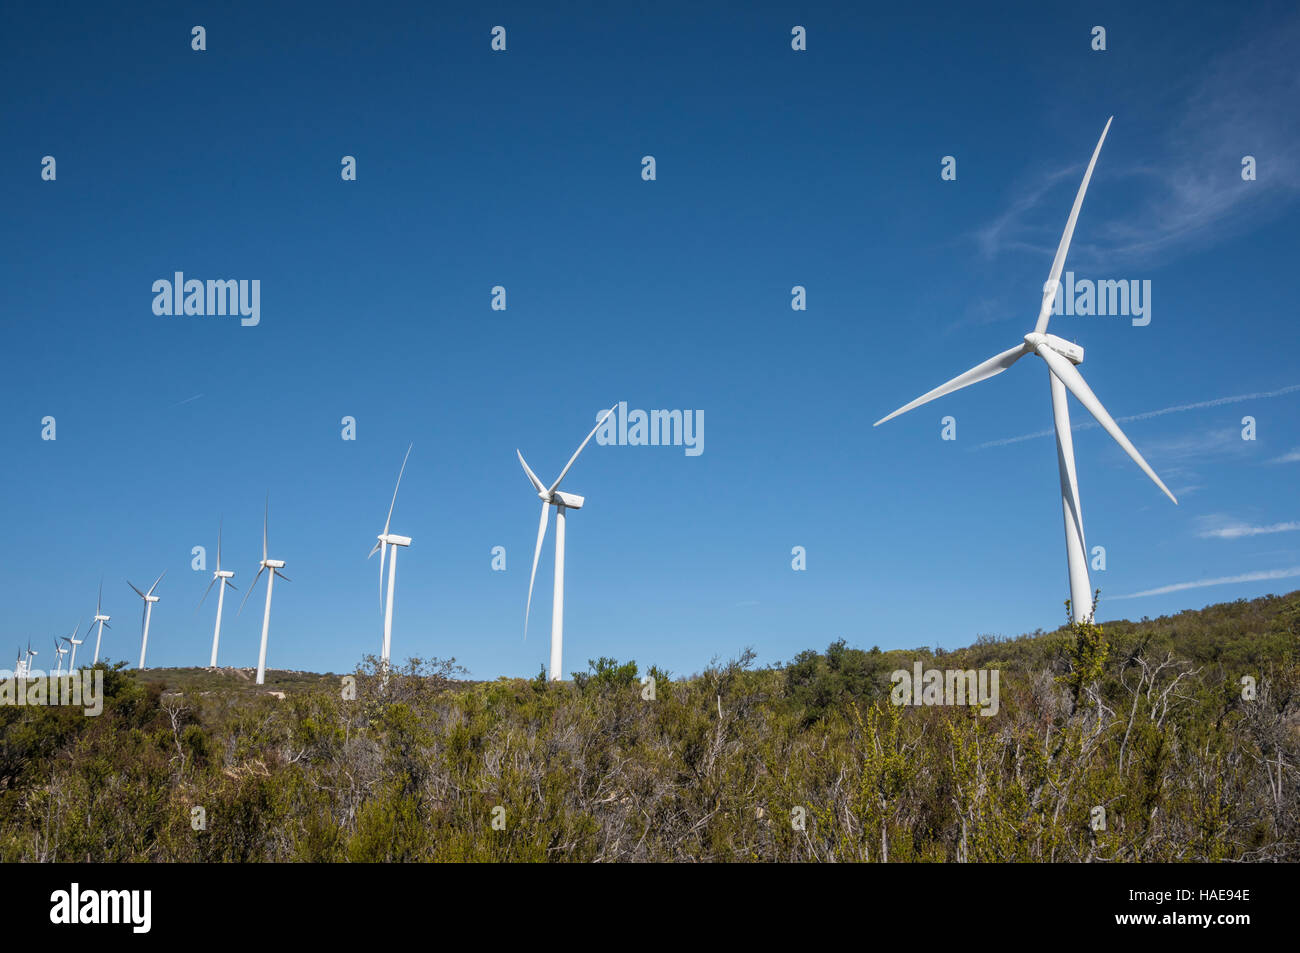 Kumeyaay wind power project electricity generating wind turbime farm, at Tecate Divide, Southern California Stock Photo